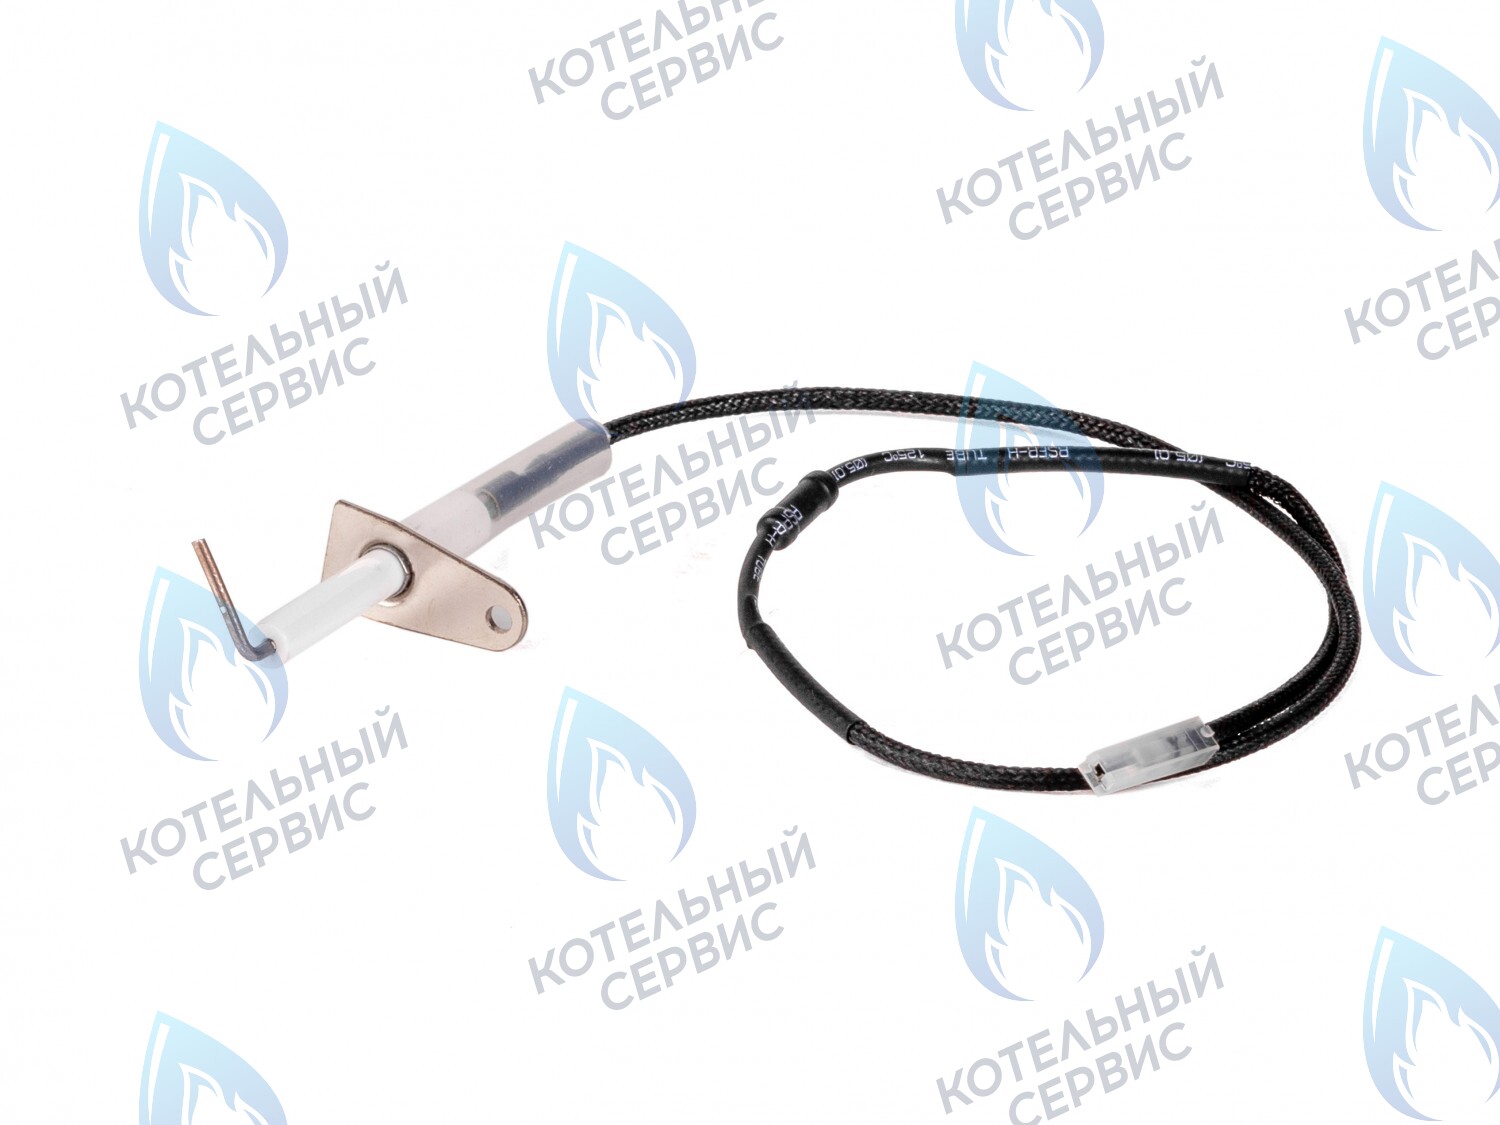 IE010 Электрод розжига и ионизации HAIER F21S(T), F21(T) (F01101, 0530002946), L1P18-F21(M)HEC (F01305, 0530016114) в Москве